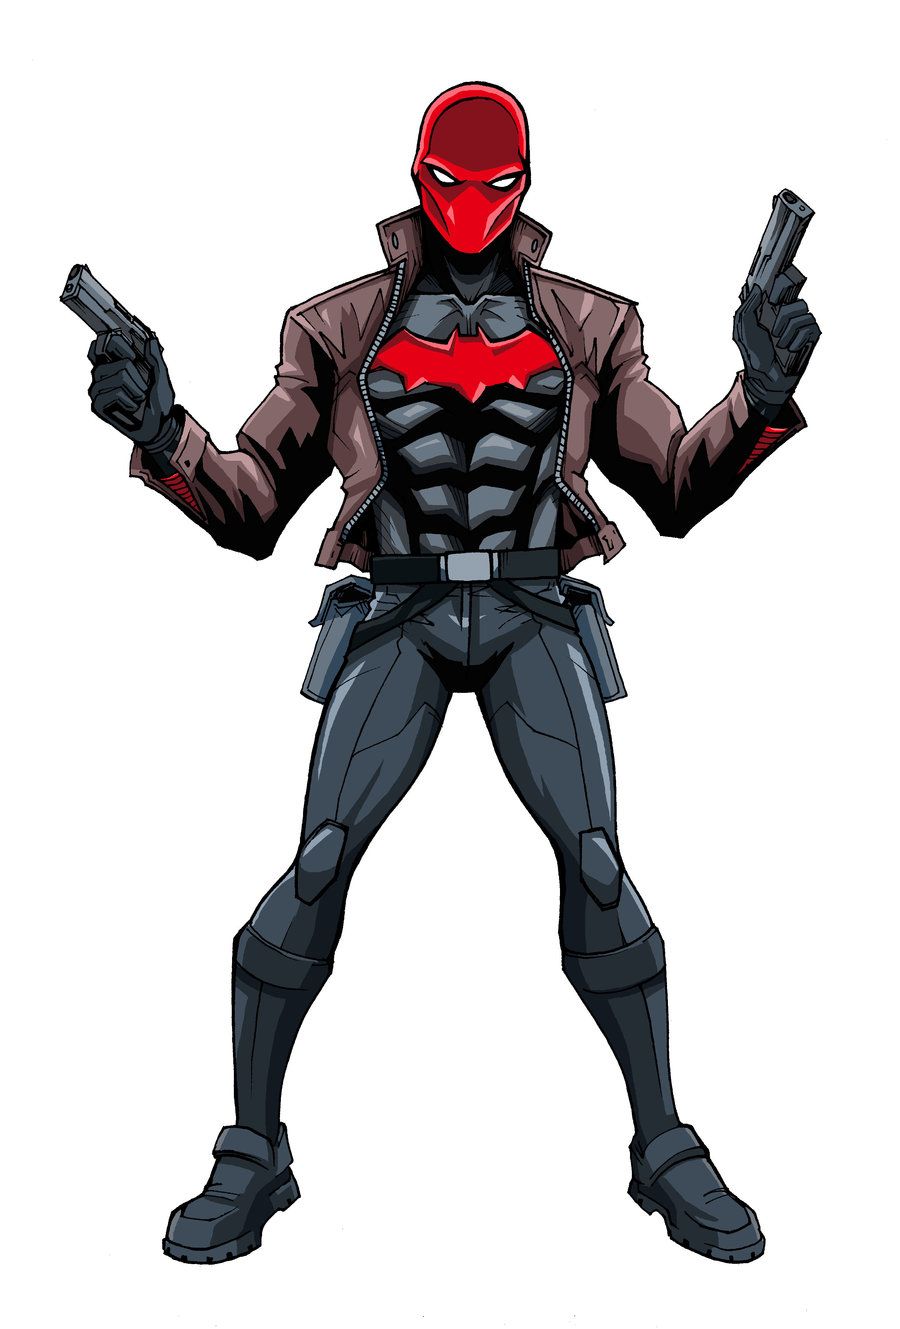 Free download Red Hood by LucianoVecchio [900x1329]